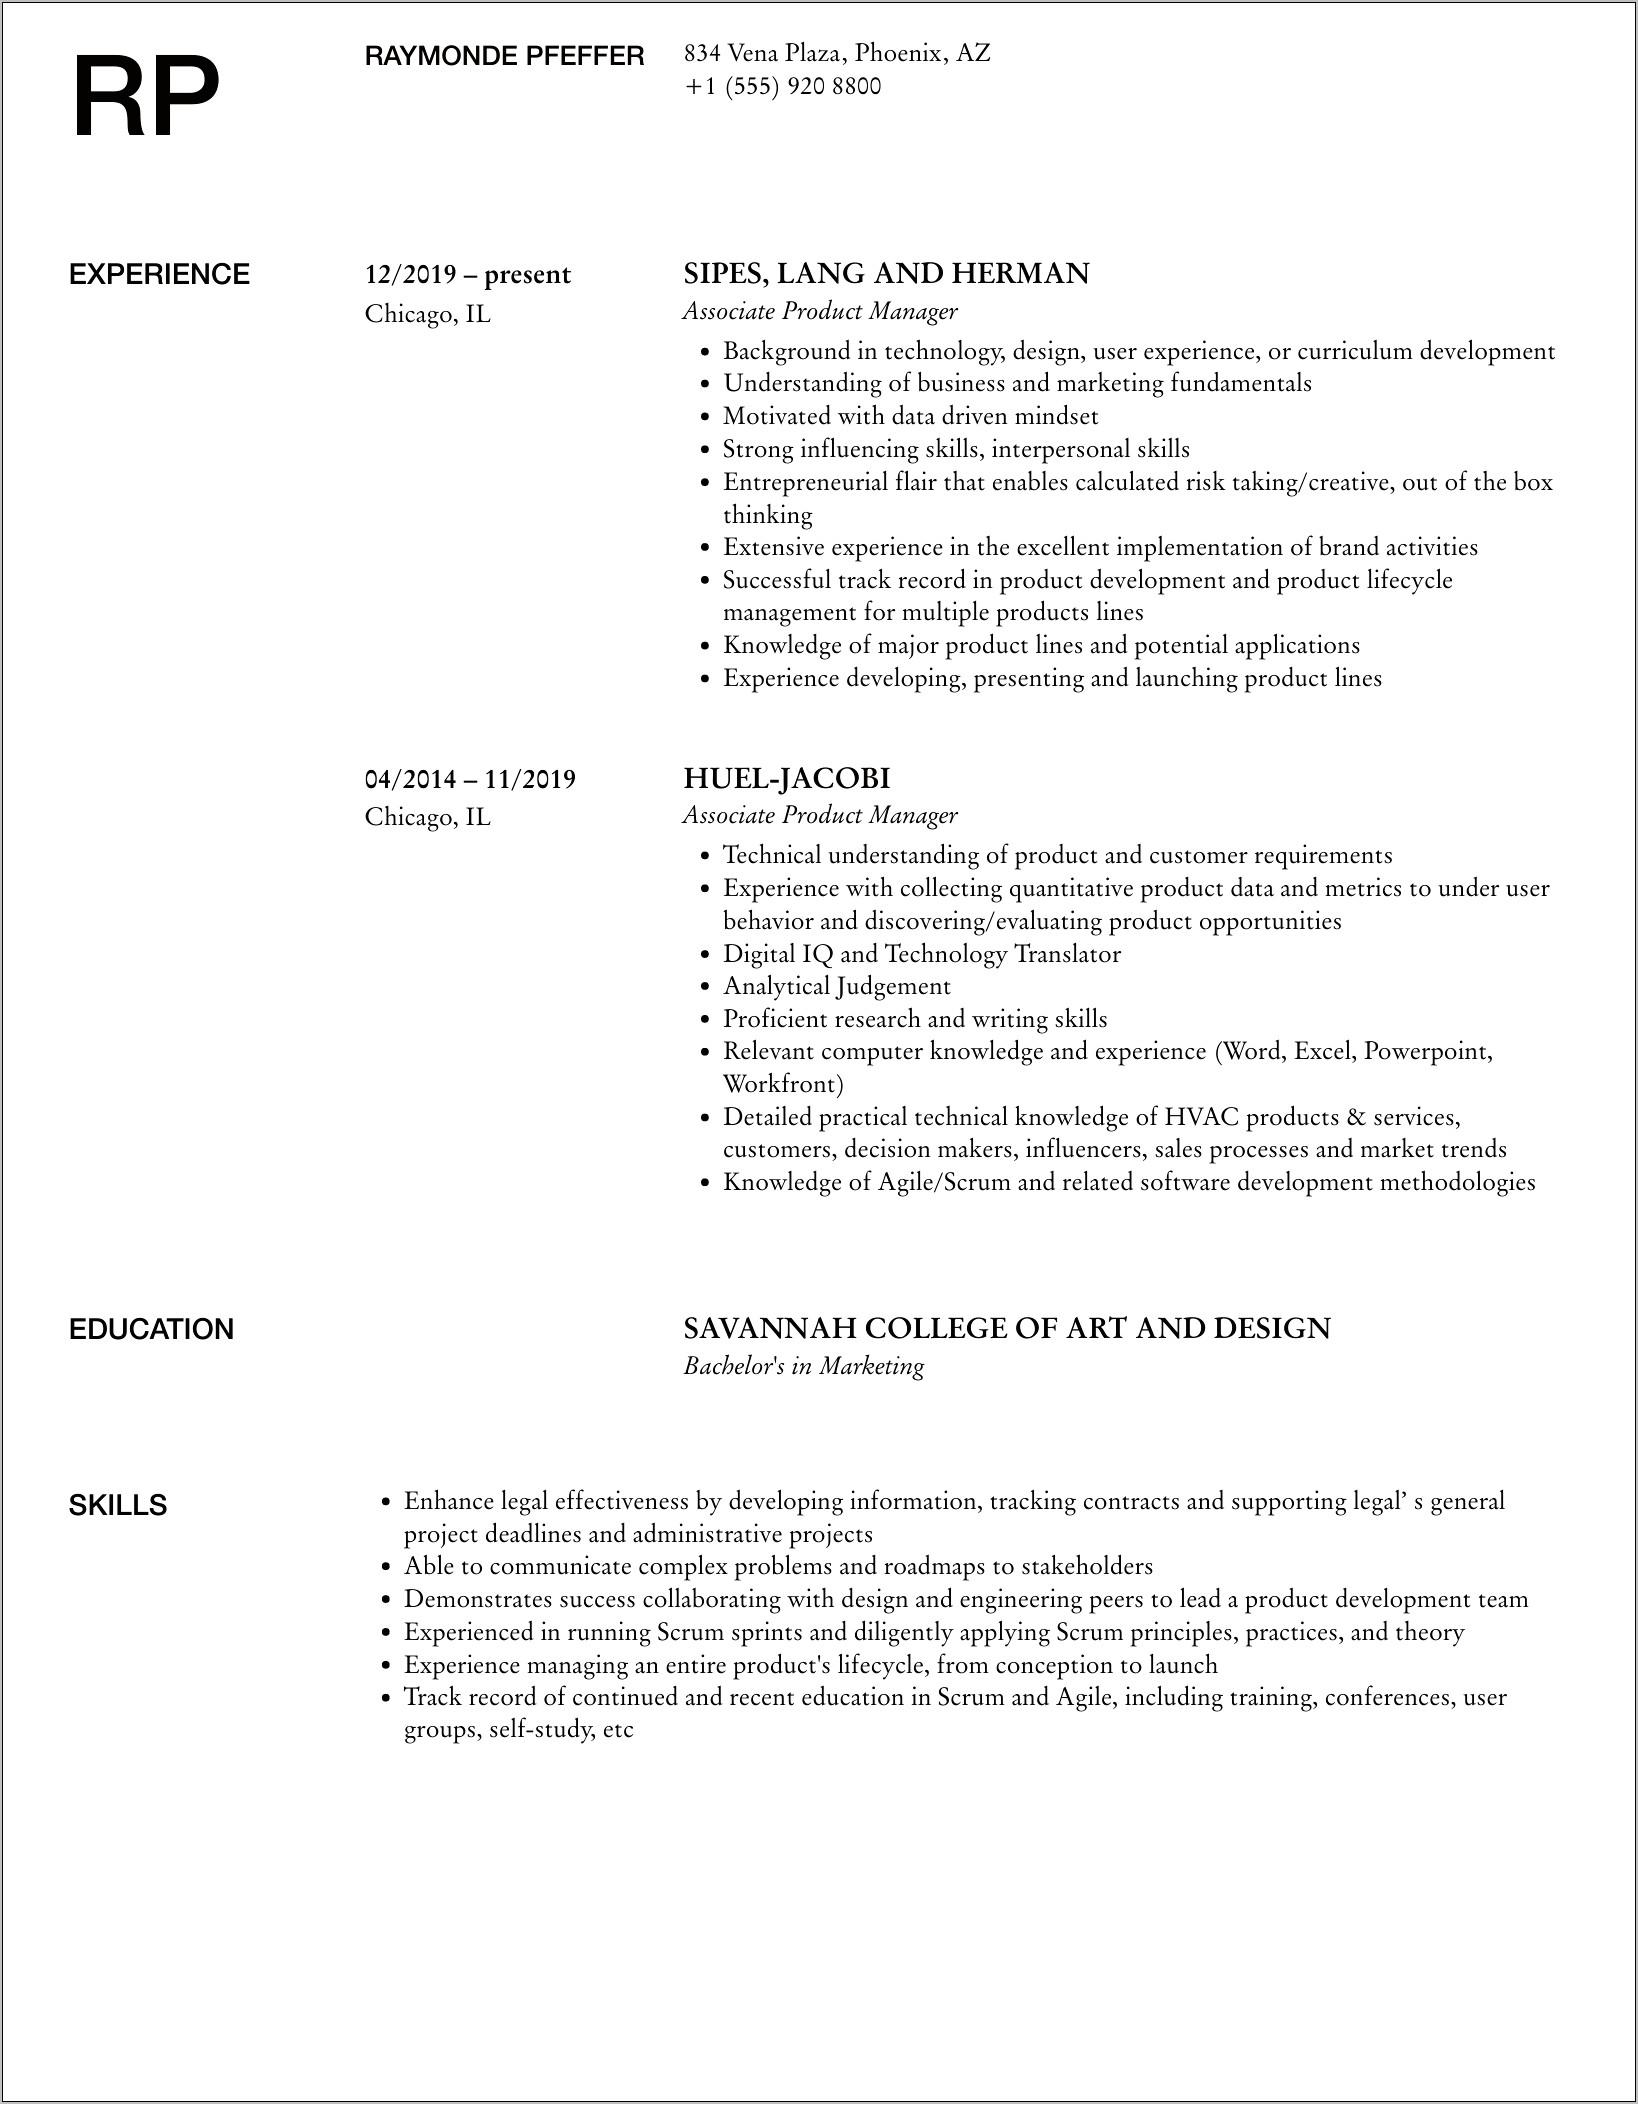 Resume For Assistant Product Manager